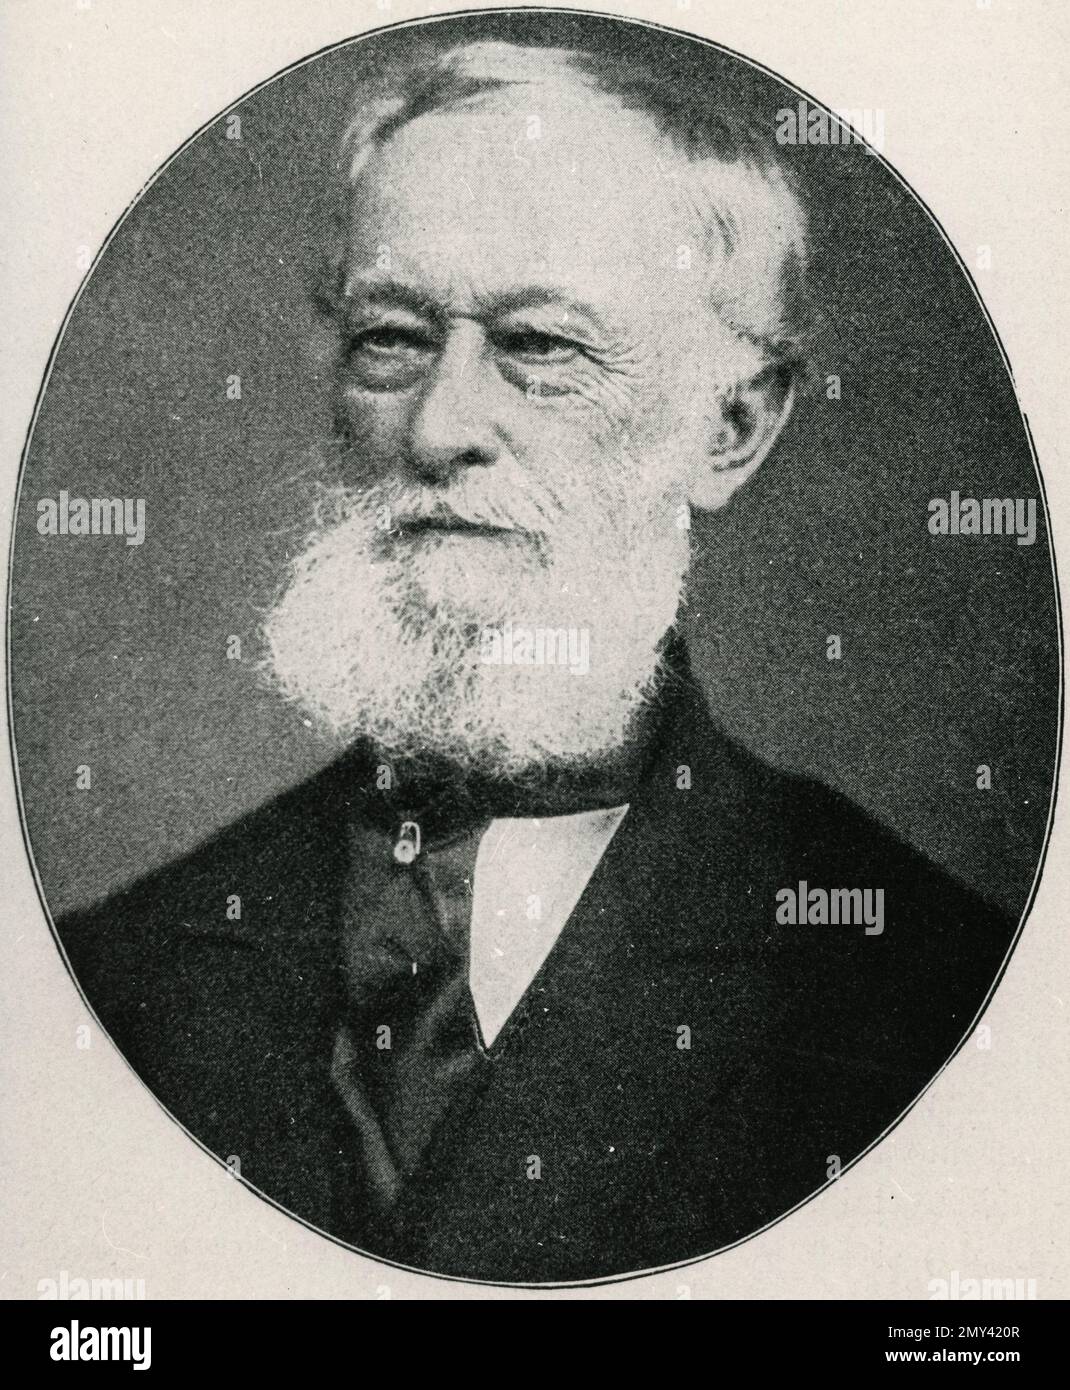 German steel manufacturer and inventor Alfred Krupp, Germany 1840s Stock Photo